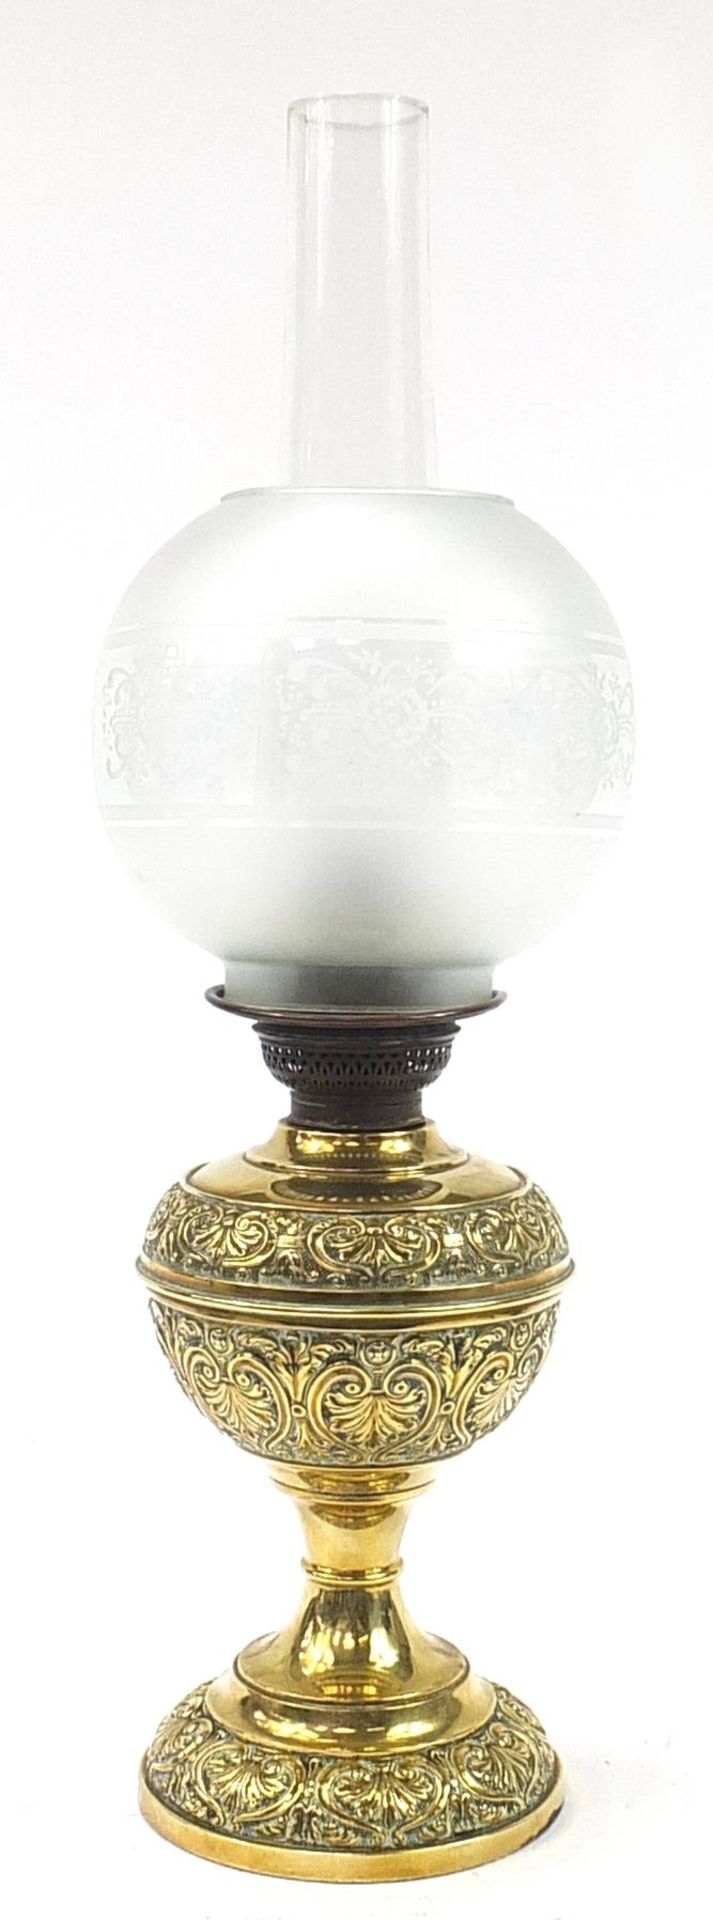 The Wizard Burner brass oil lamp with globular glass shade, 62.5cm high - Image 2 of 4